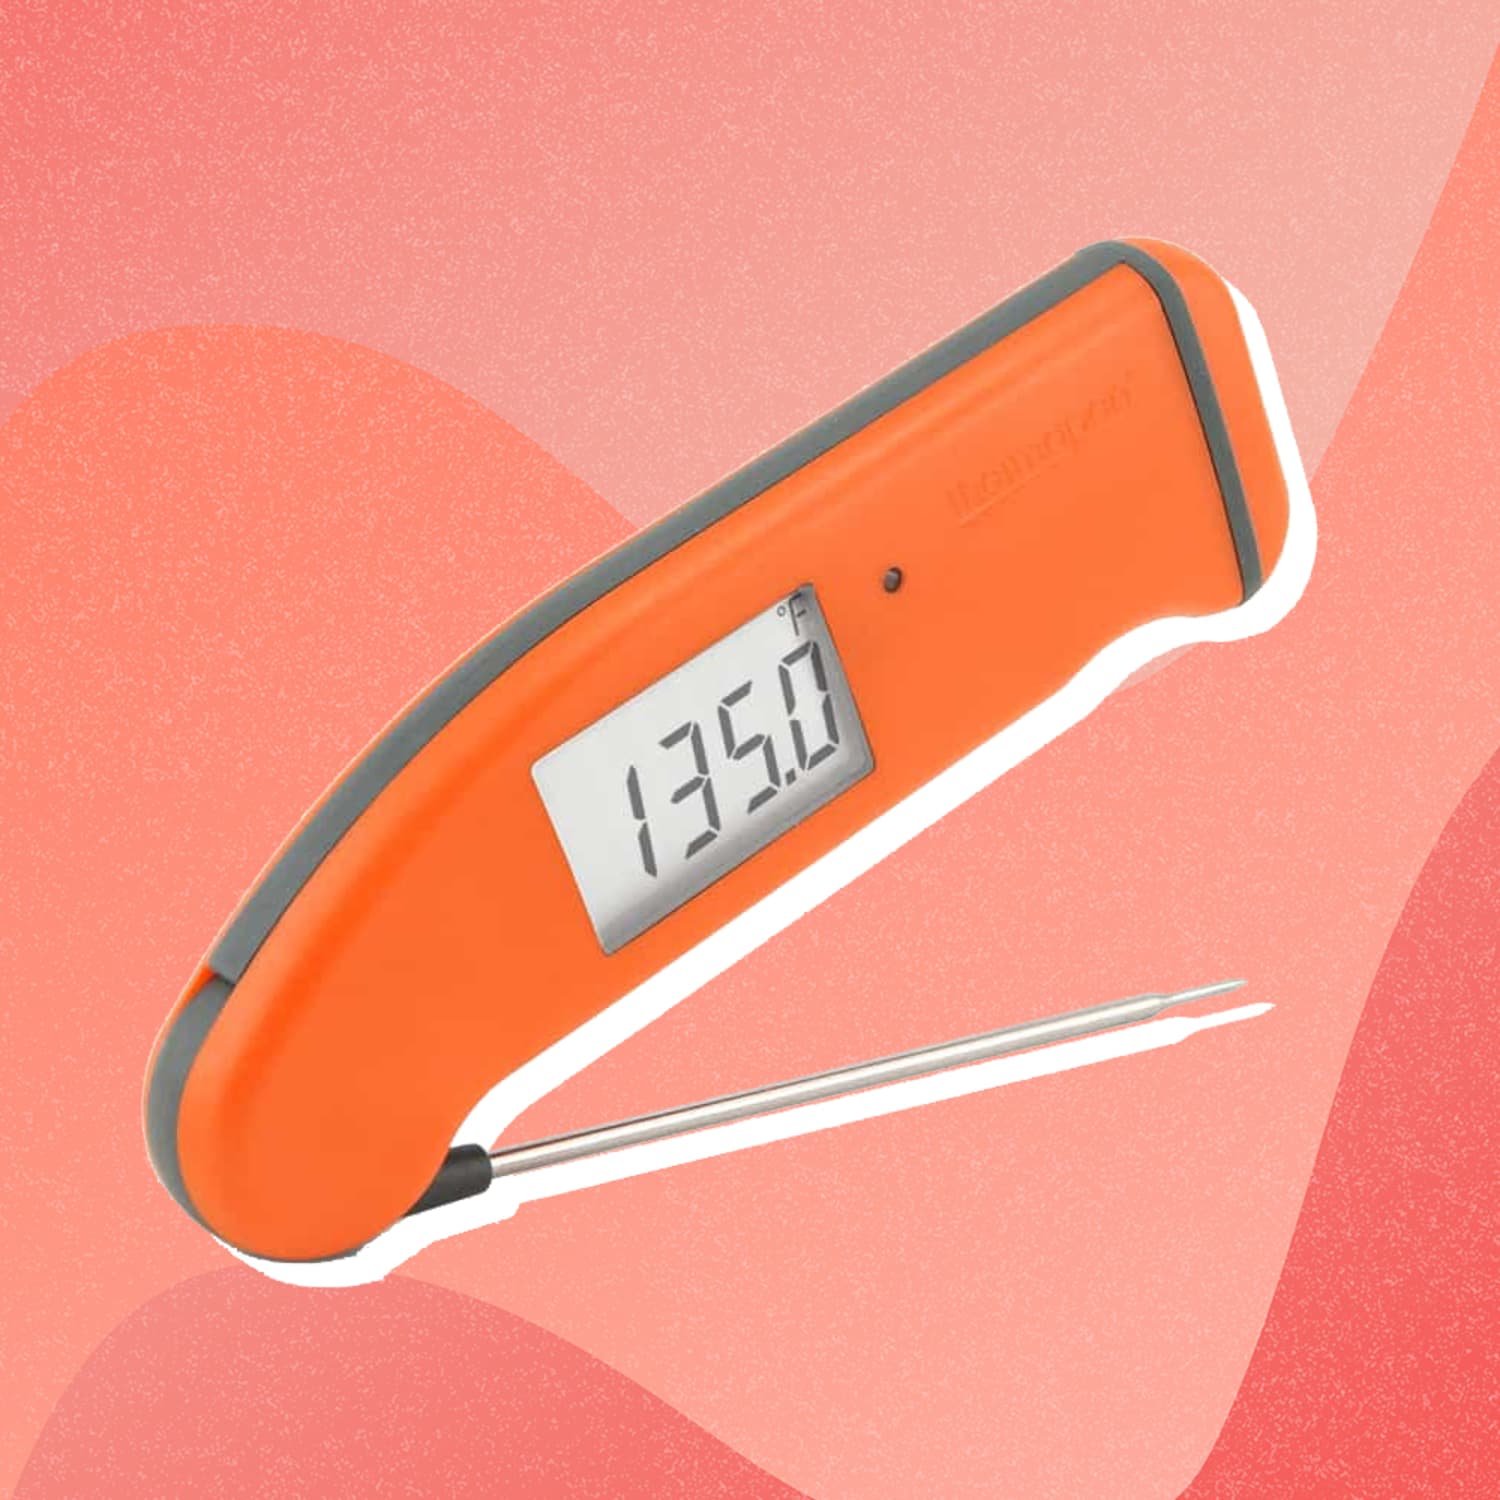 Thermapen Mk4 sale: Save on the meat thermometer chefs swear by